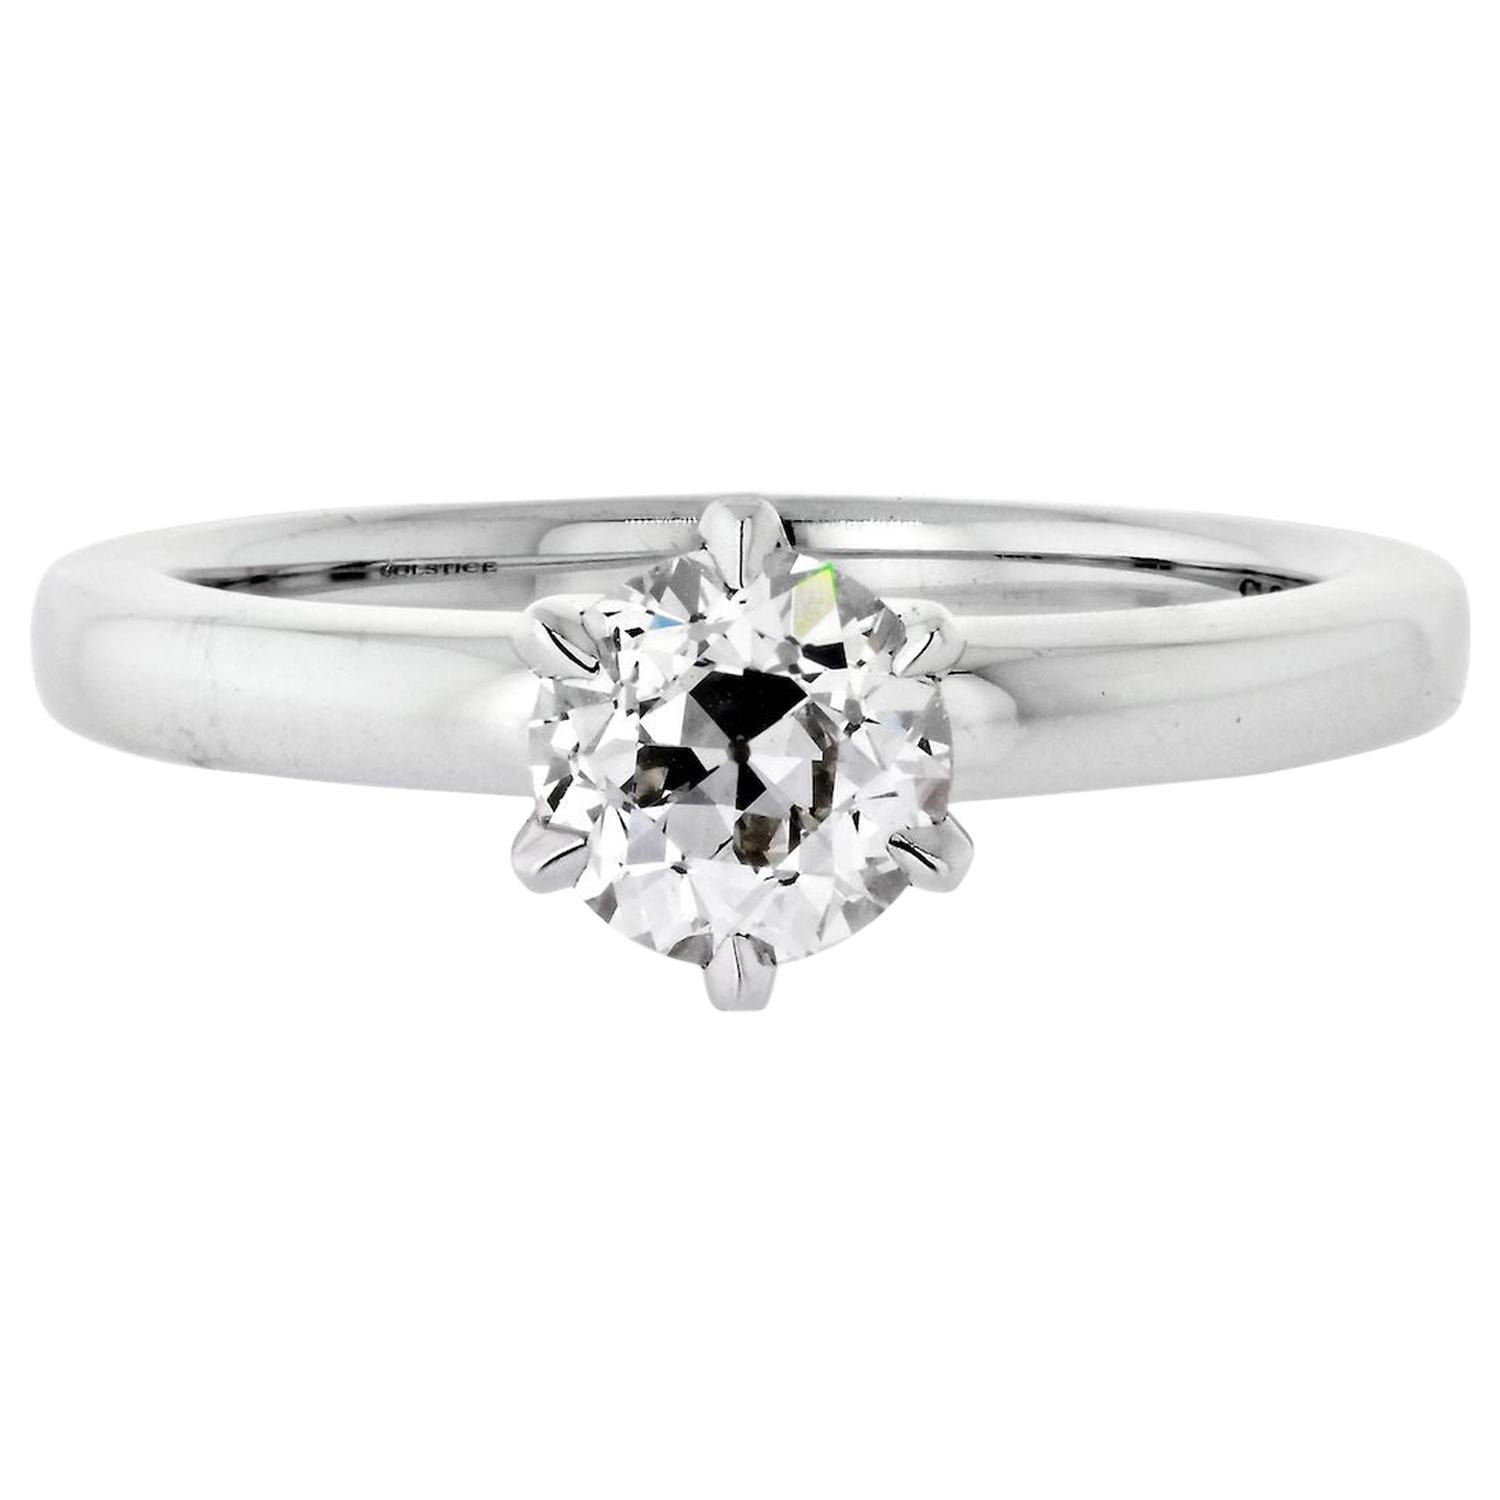 1.01 Carat Old European Cut Diamond I/VS2 GIA Solitaire Engagement Ring For Sale